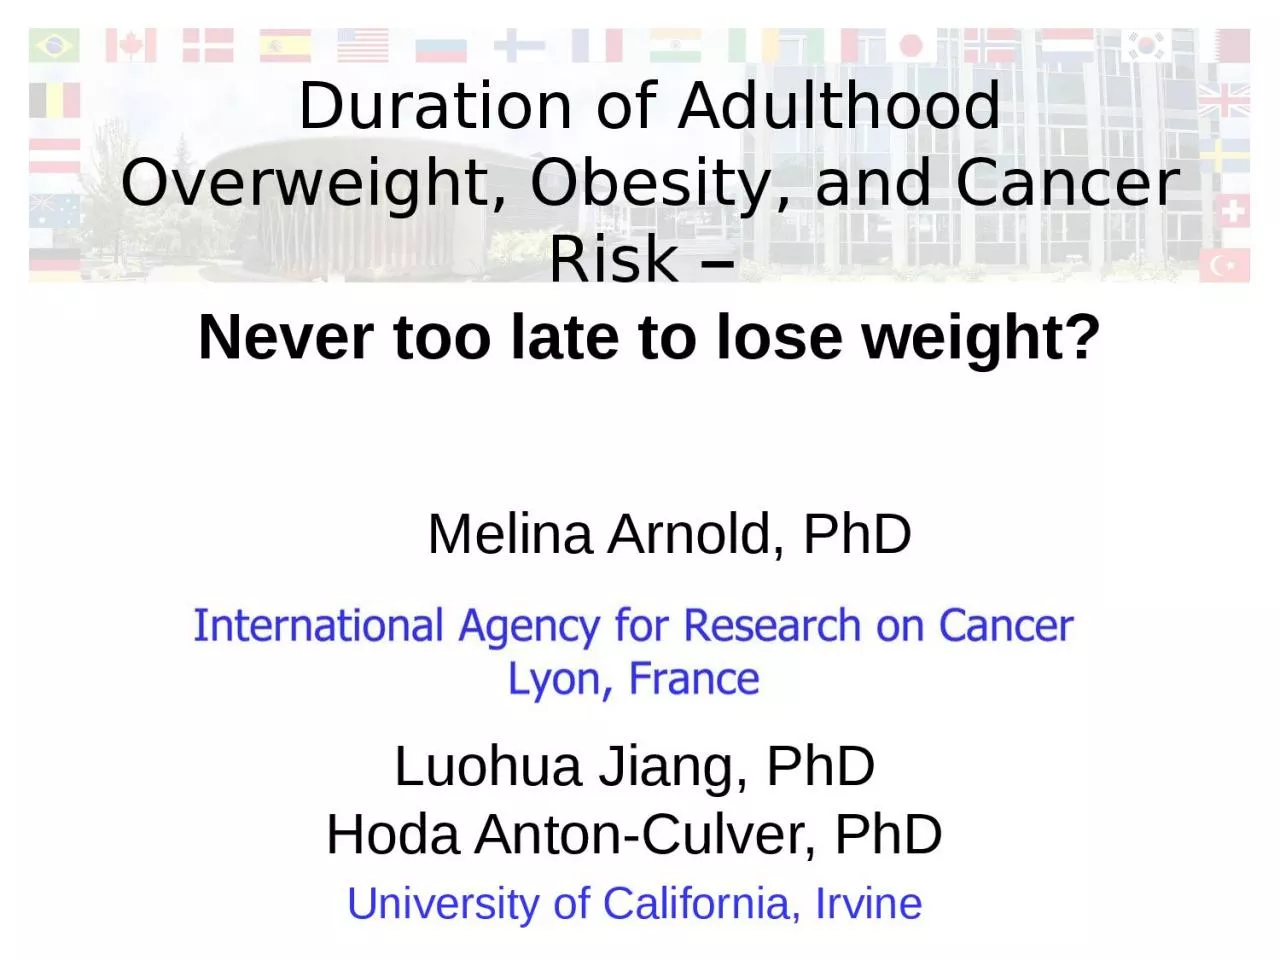 Duration of Adulthood Overweight, Obesity